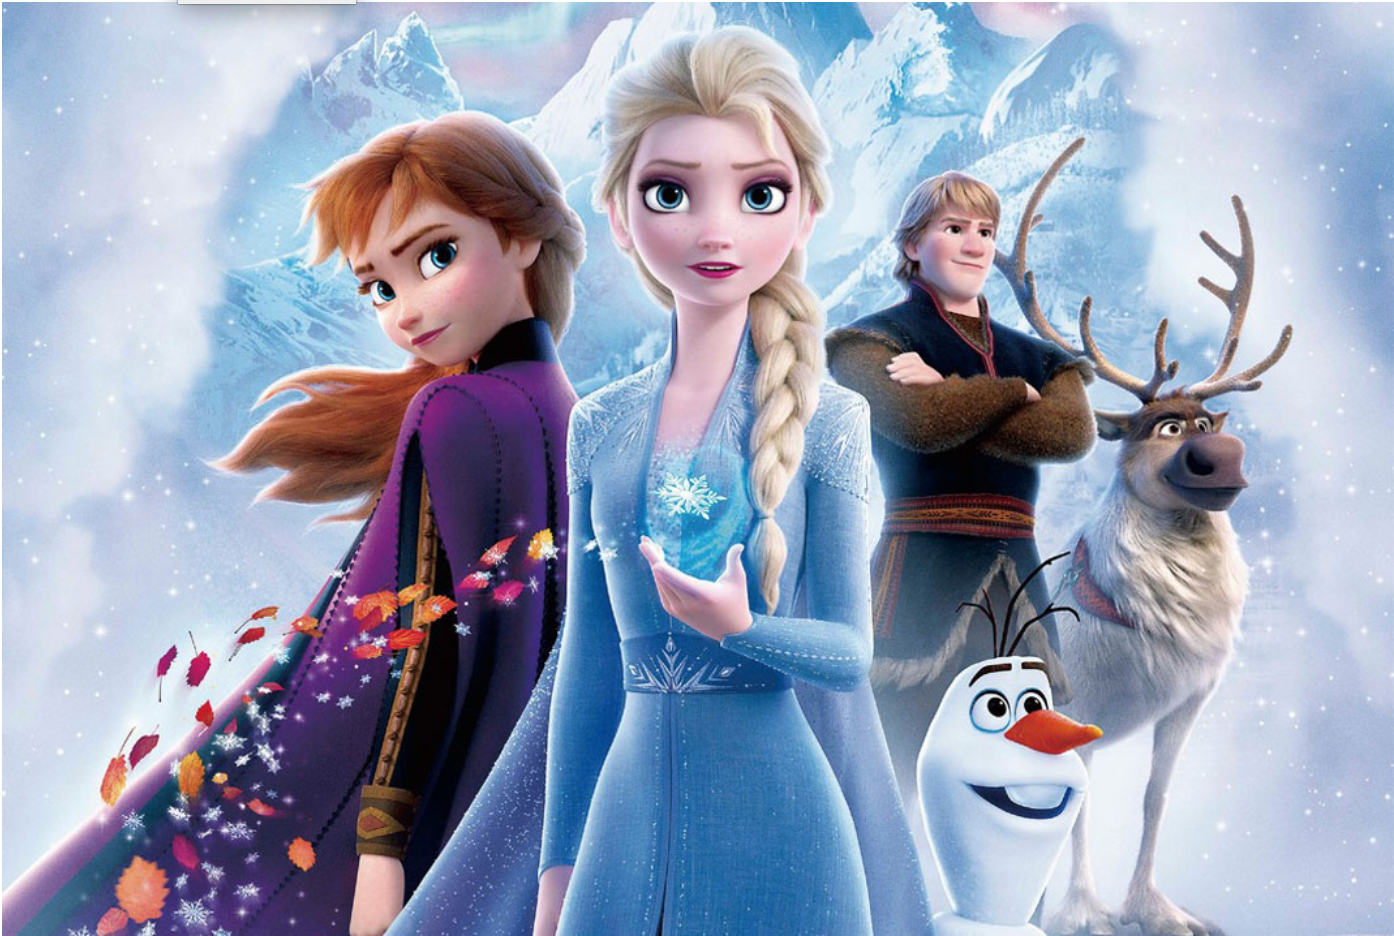 Frozen 2 themed party